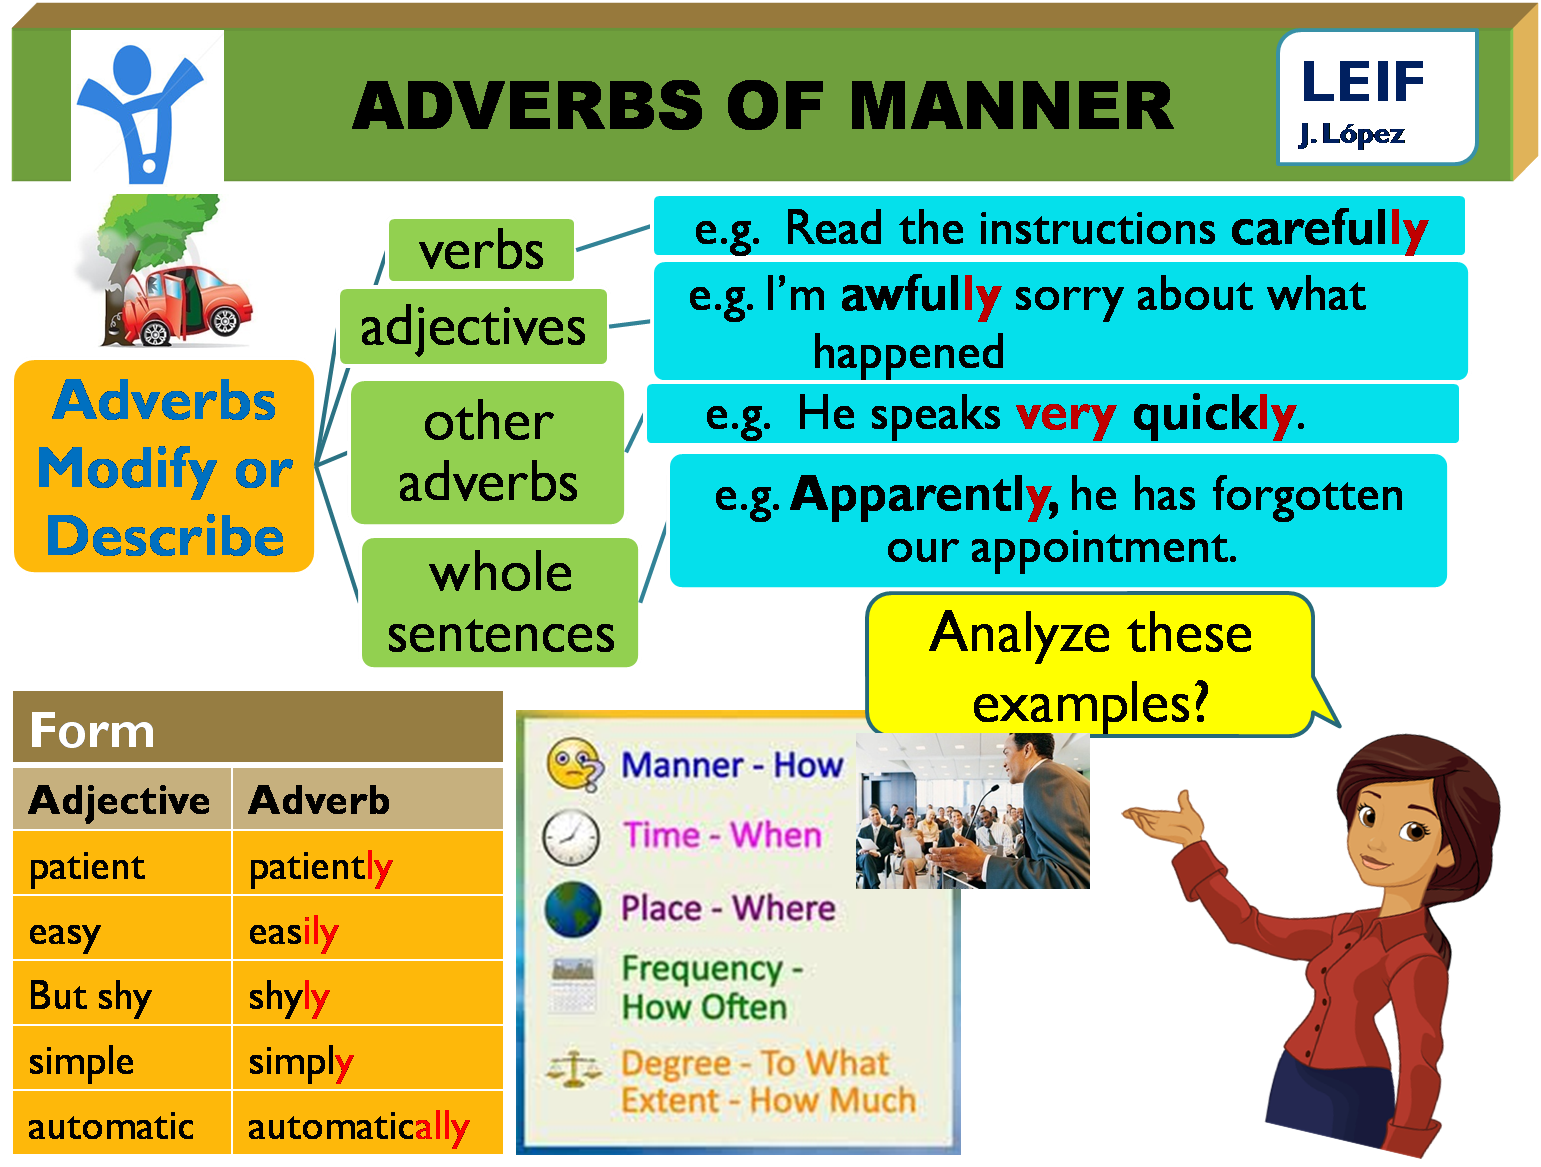 Adverbs of manner список. Adverbs of manner правило. Adverbs of manner в английском языке. Adverbs правило. Patient adjective